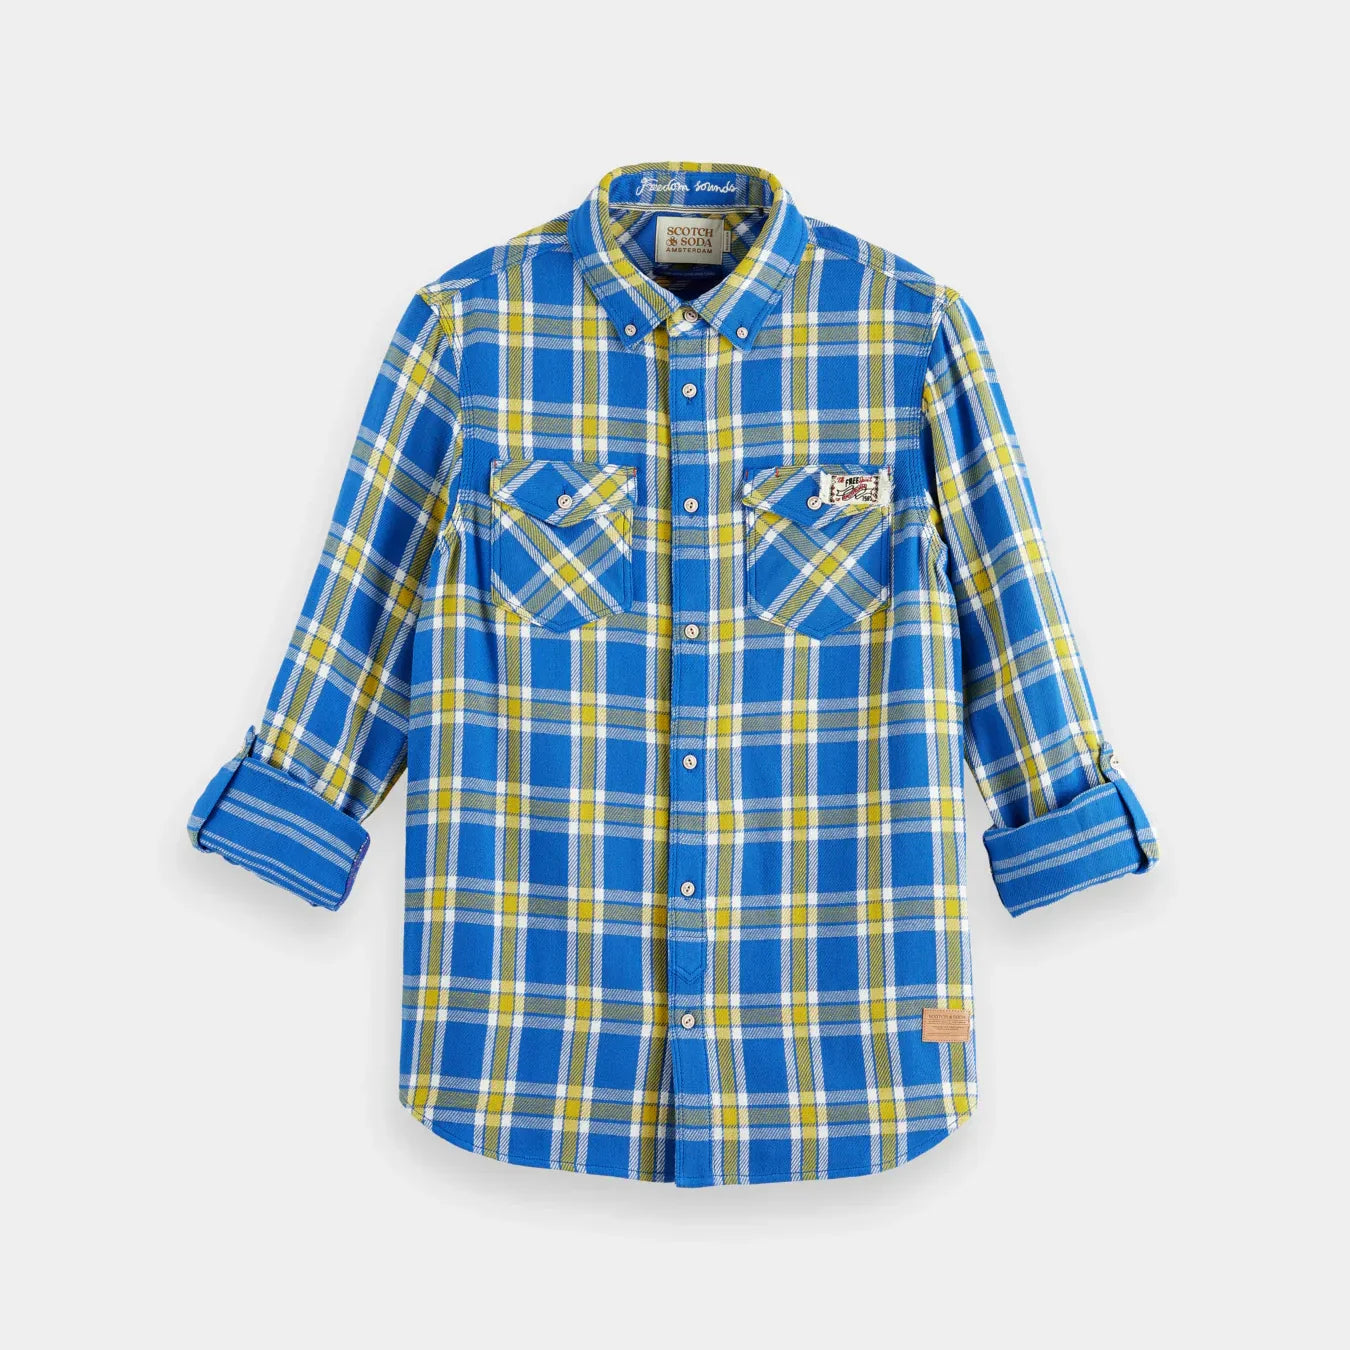 'Scotch & Soda Double-Faced Twill Check Shirt' in 'Blue/Yellow Check' colour